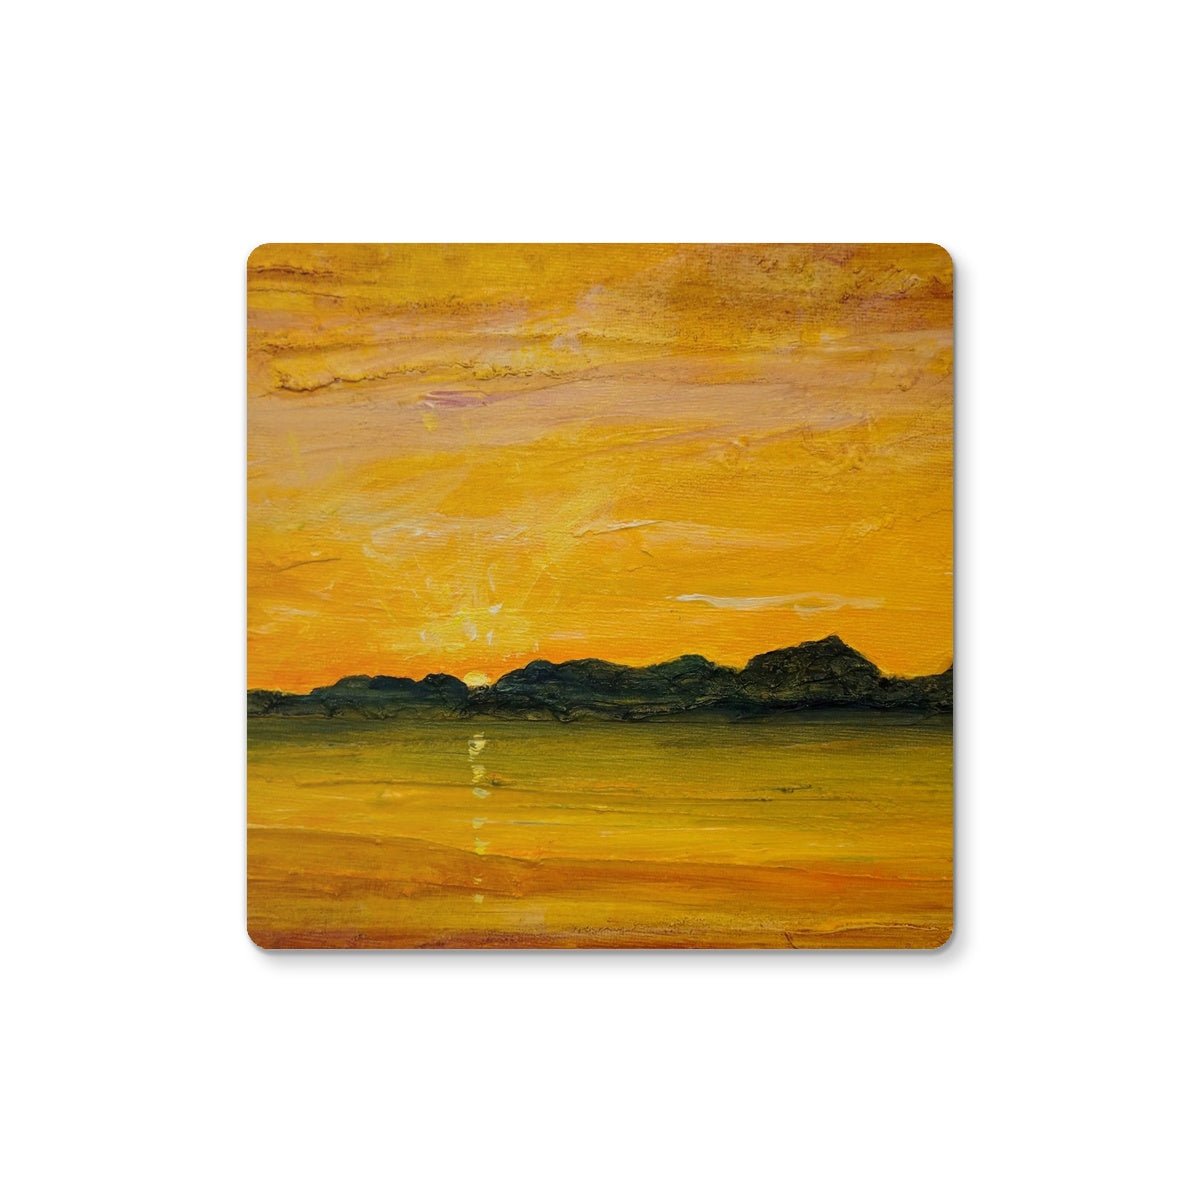 Jura Sunset Art Gifts Coaster-Coasters-Hebridean Islands Art Gallery-6 Coasters-Paintings, Prints, Homeware, Art Gifts From Scotland By Scottish Artist Kevin Hunter